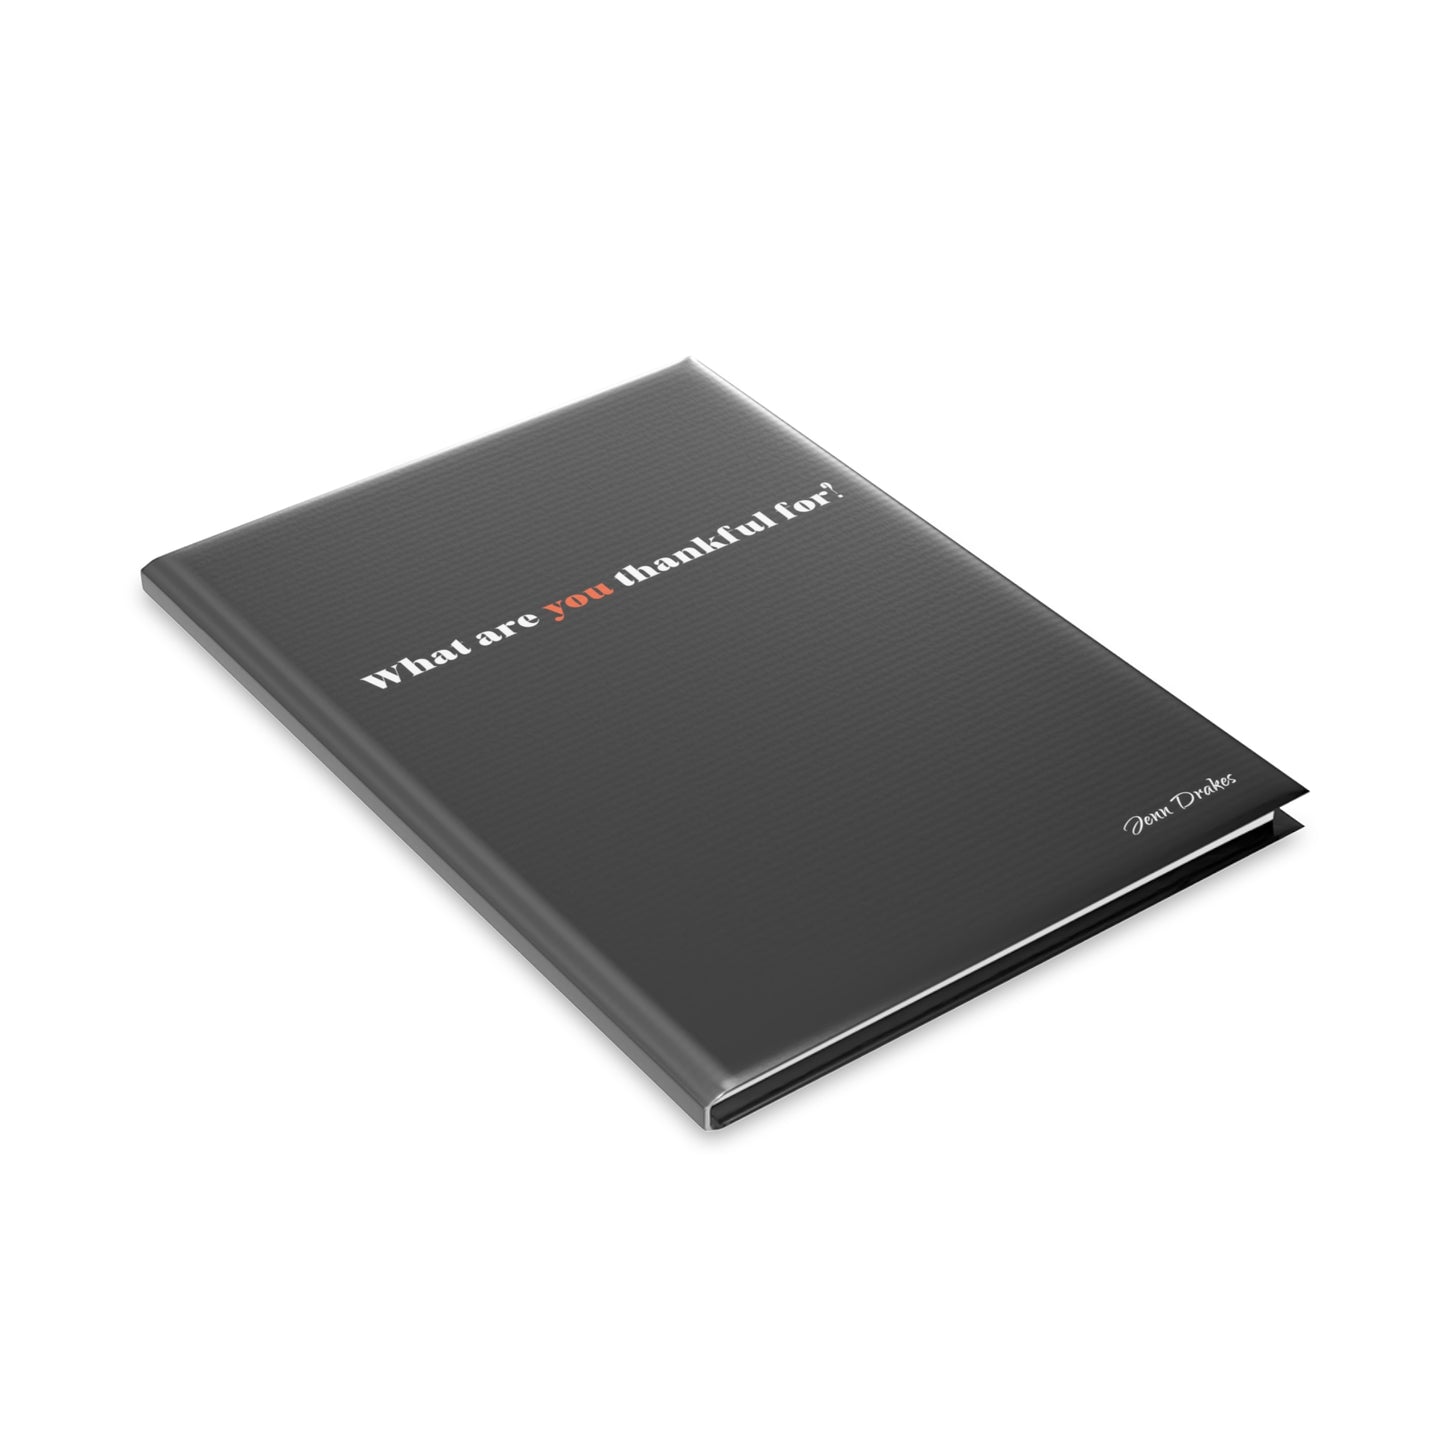 Black Hardcover Notebook with Puffy Covers